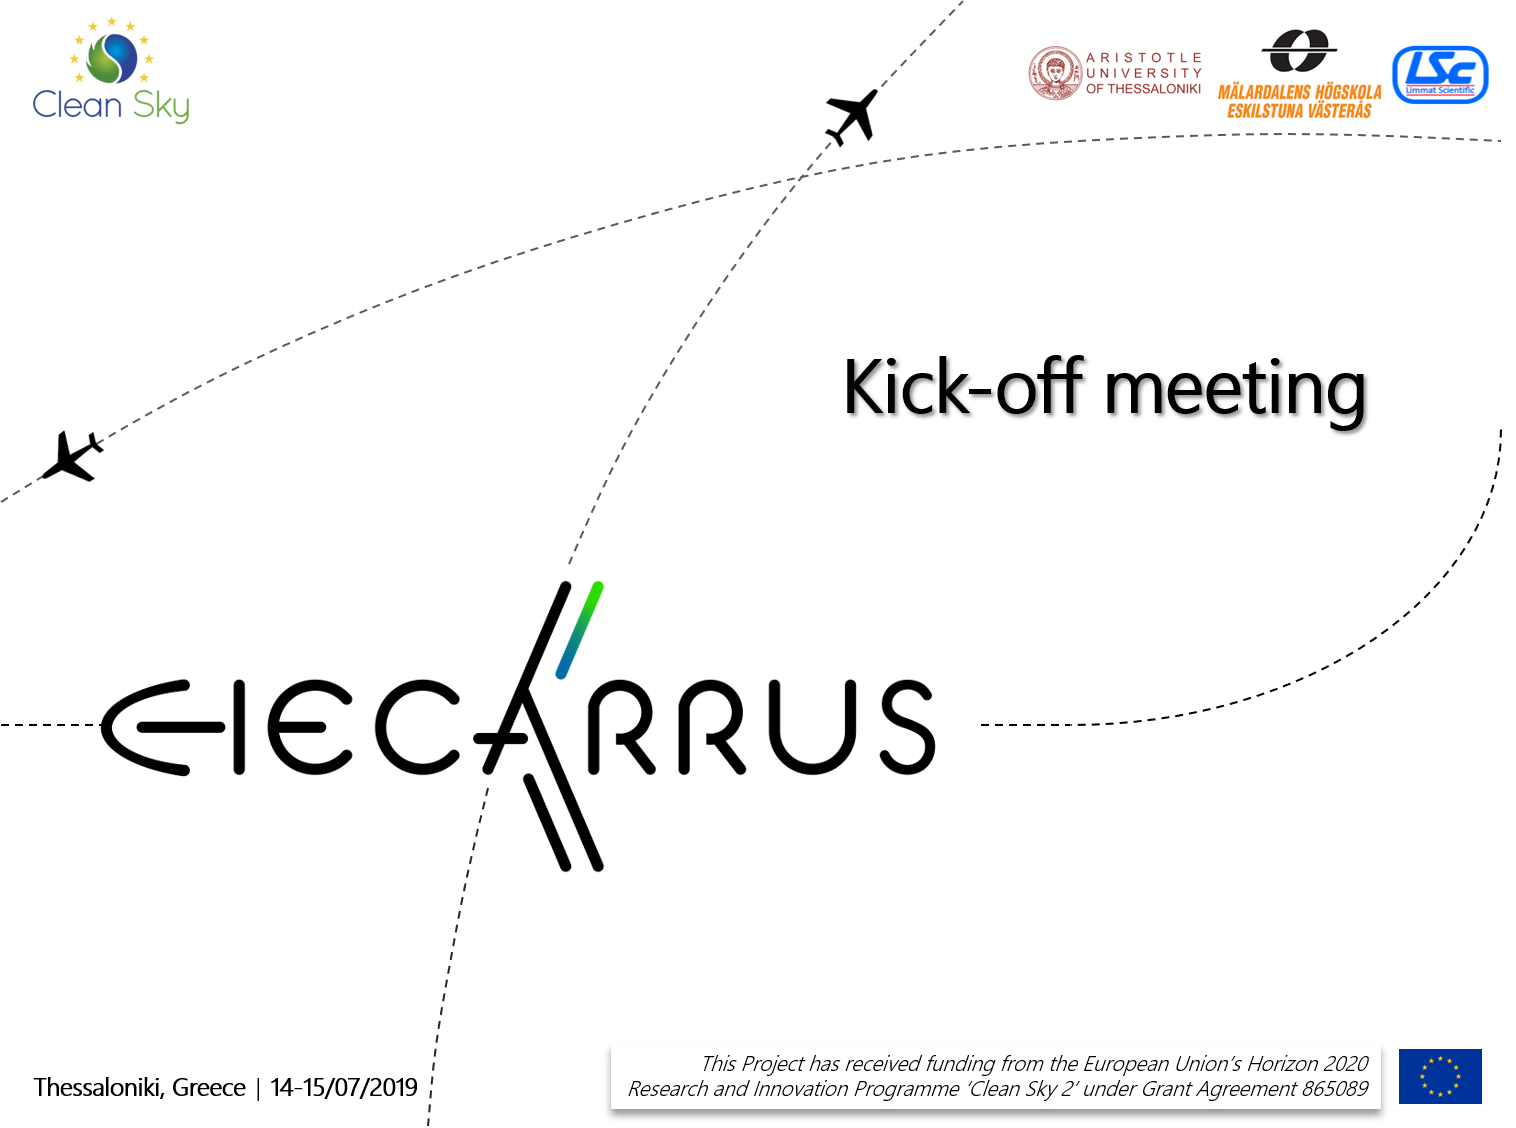 Kick-off meeting, HECARRUS Project